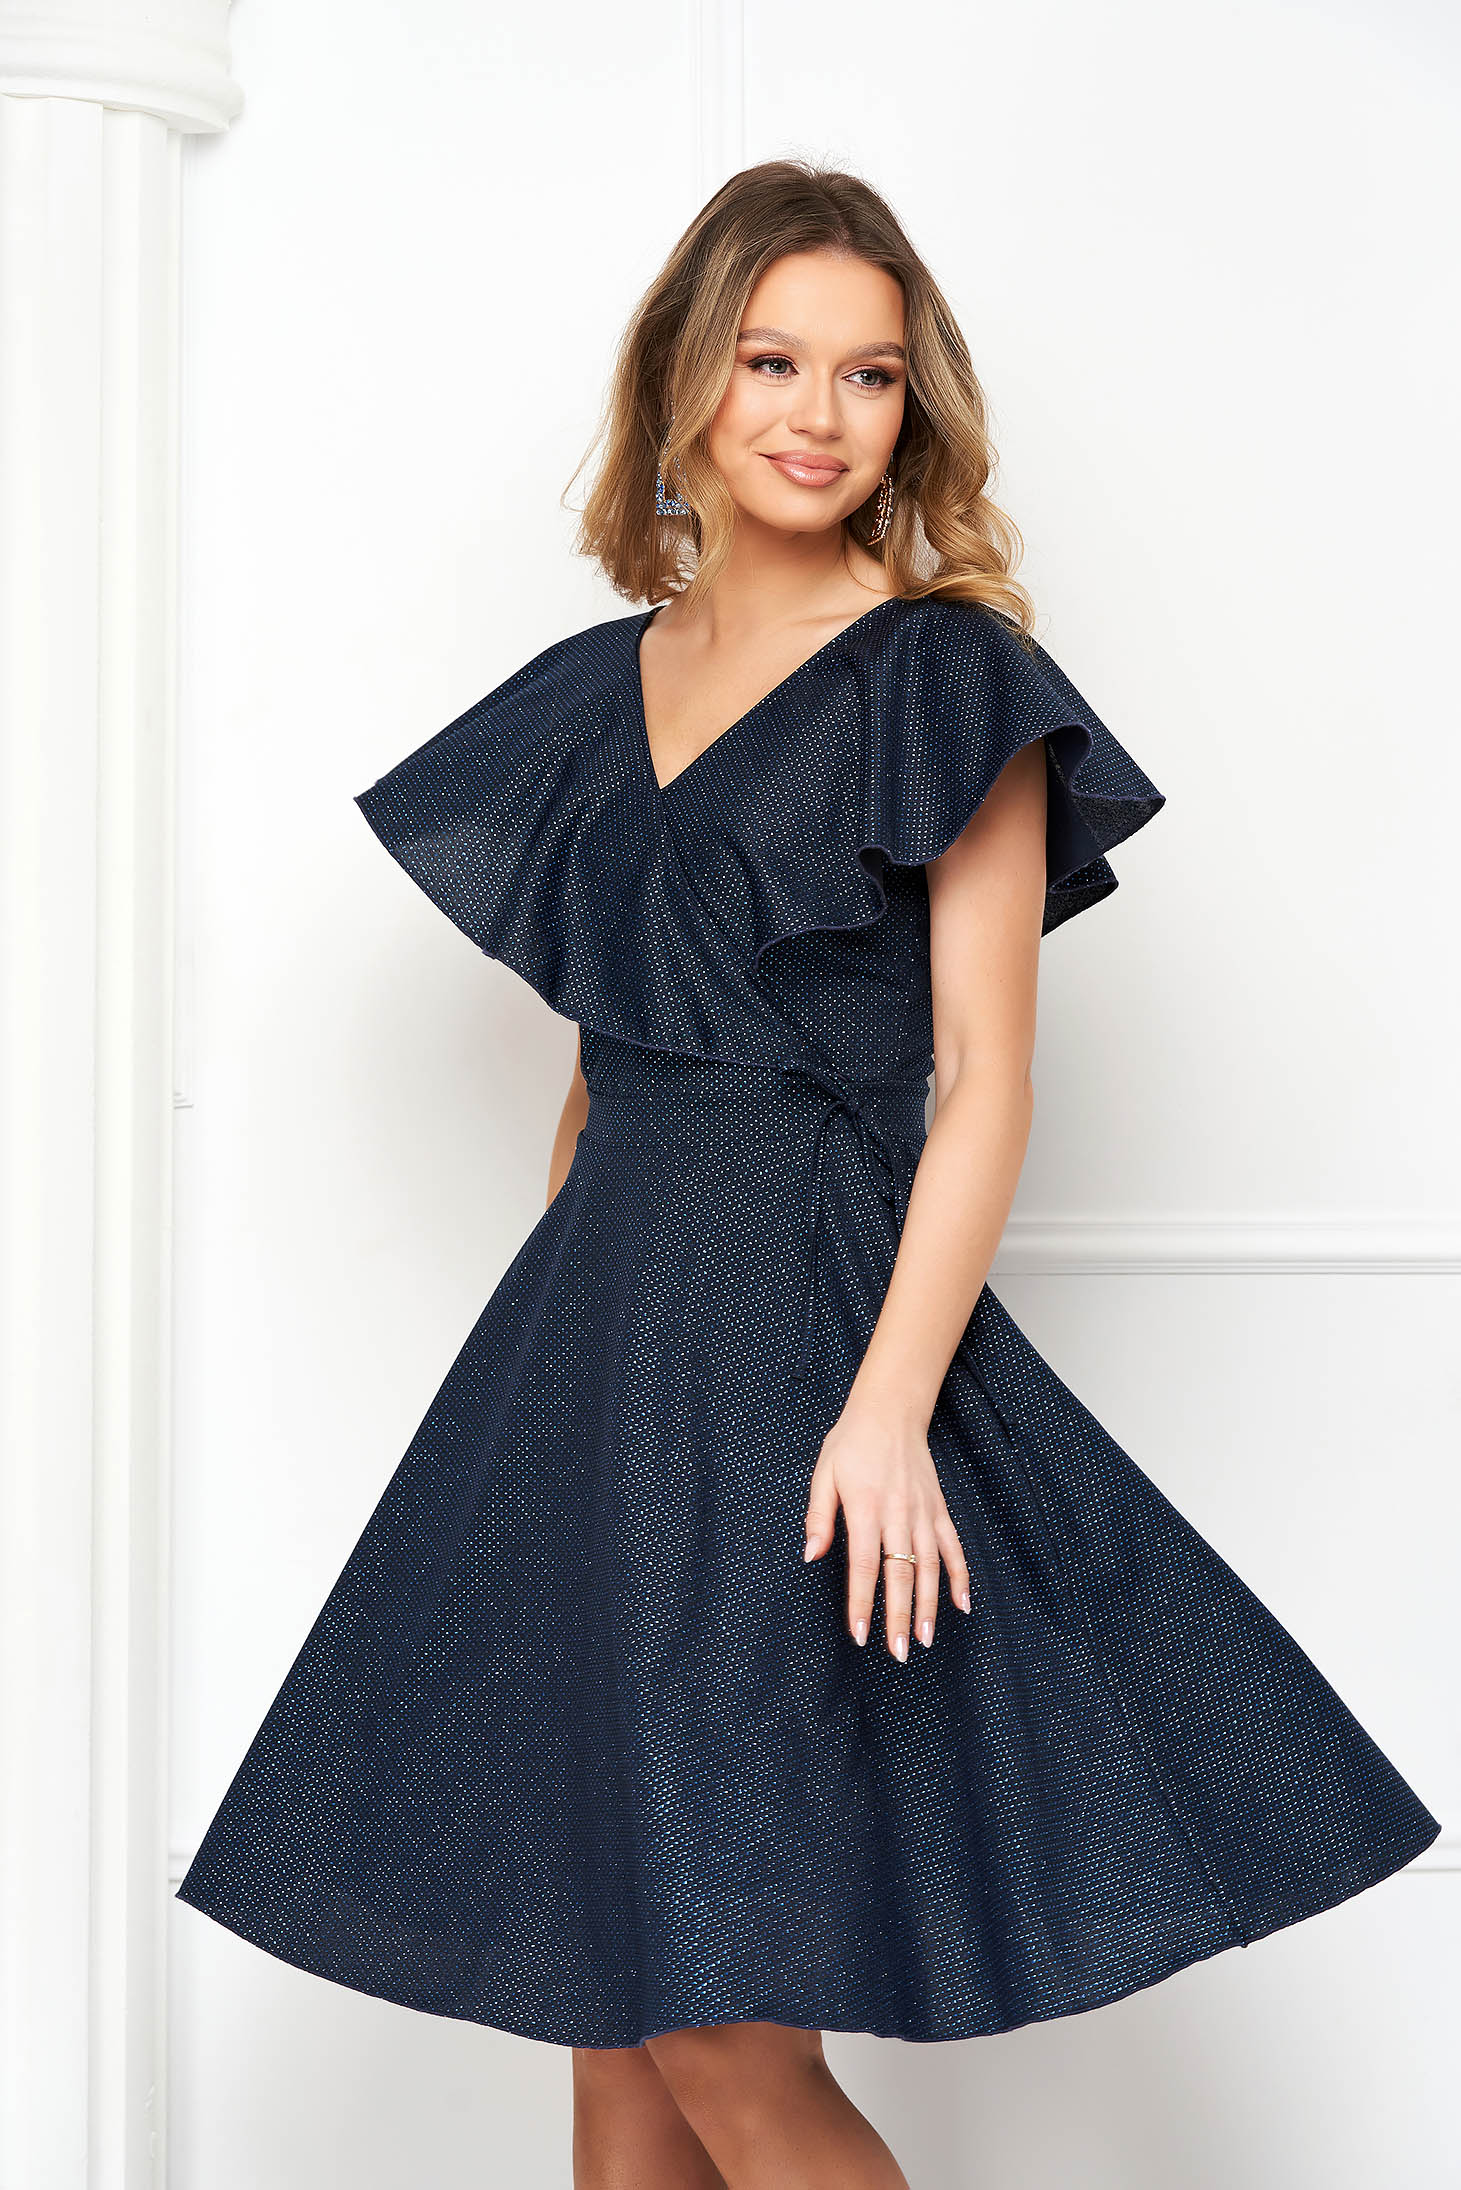 Navy Blue Crepe Knee-Length A-Line Dress with Glitter Applications - StarShinerS